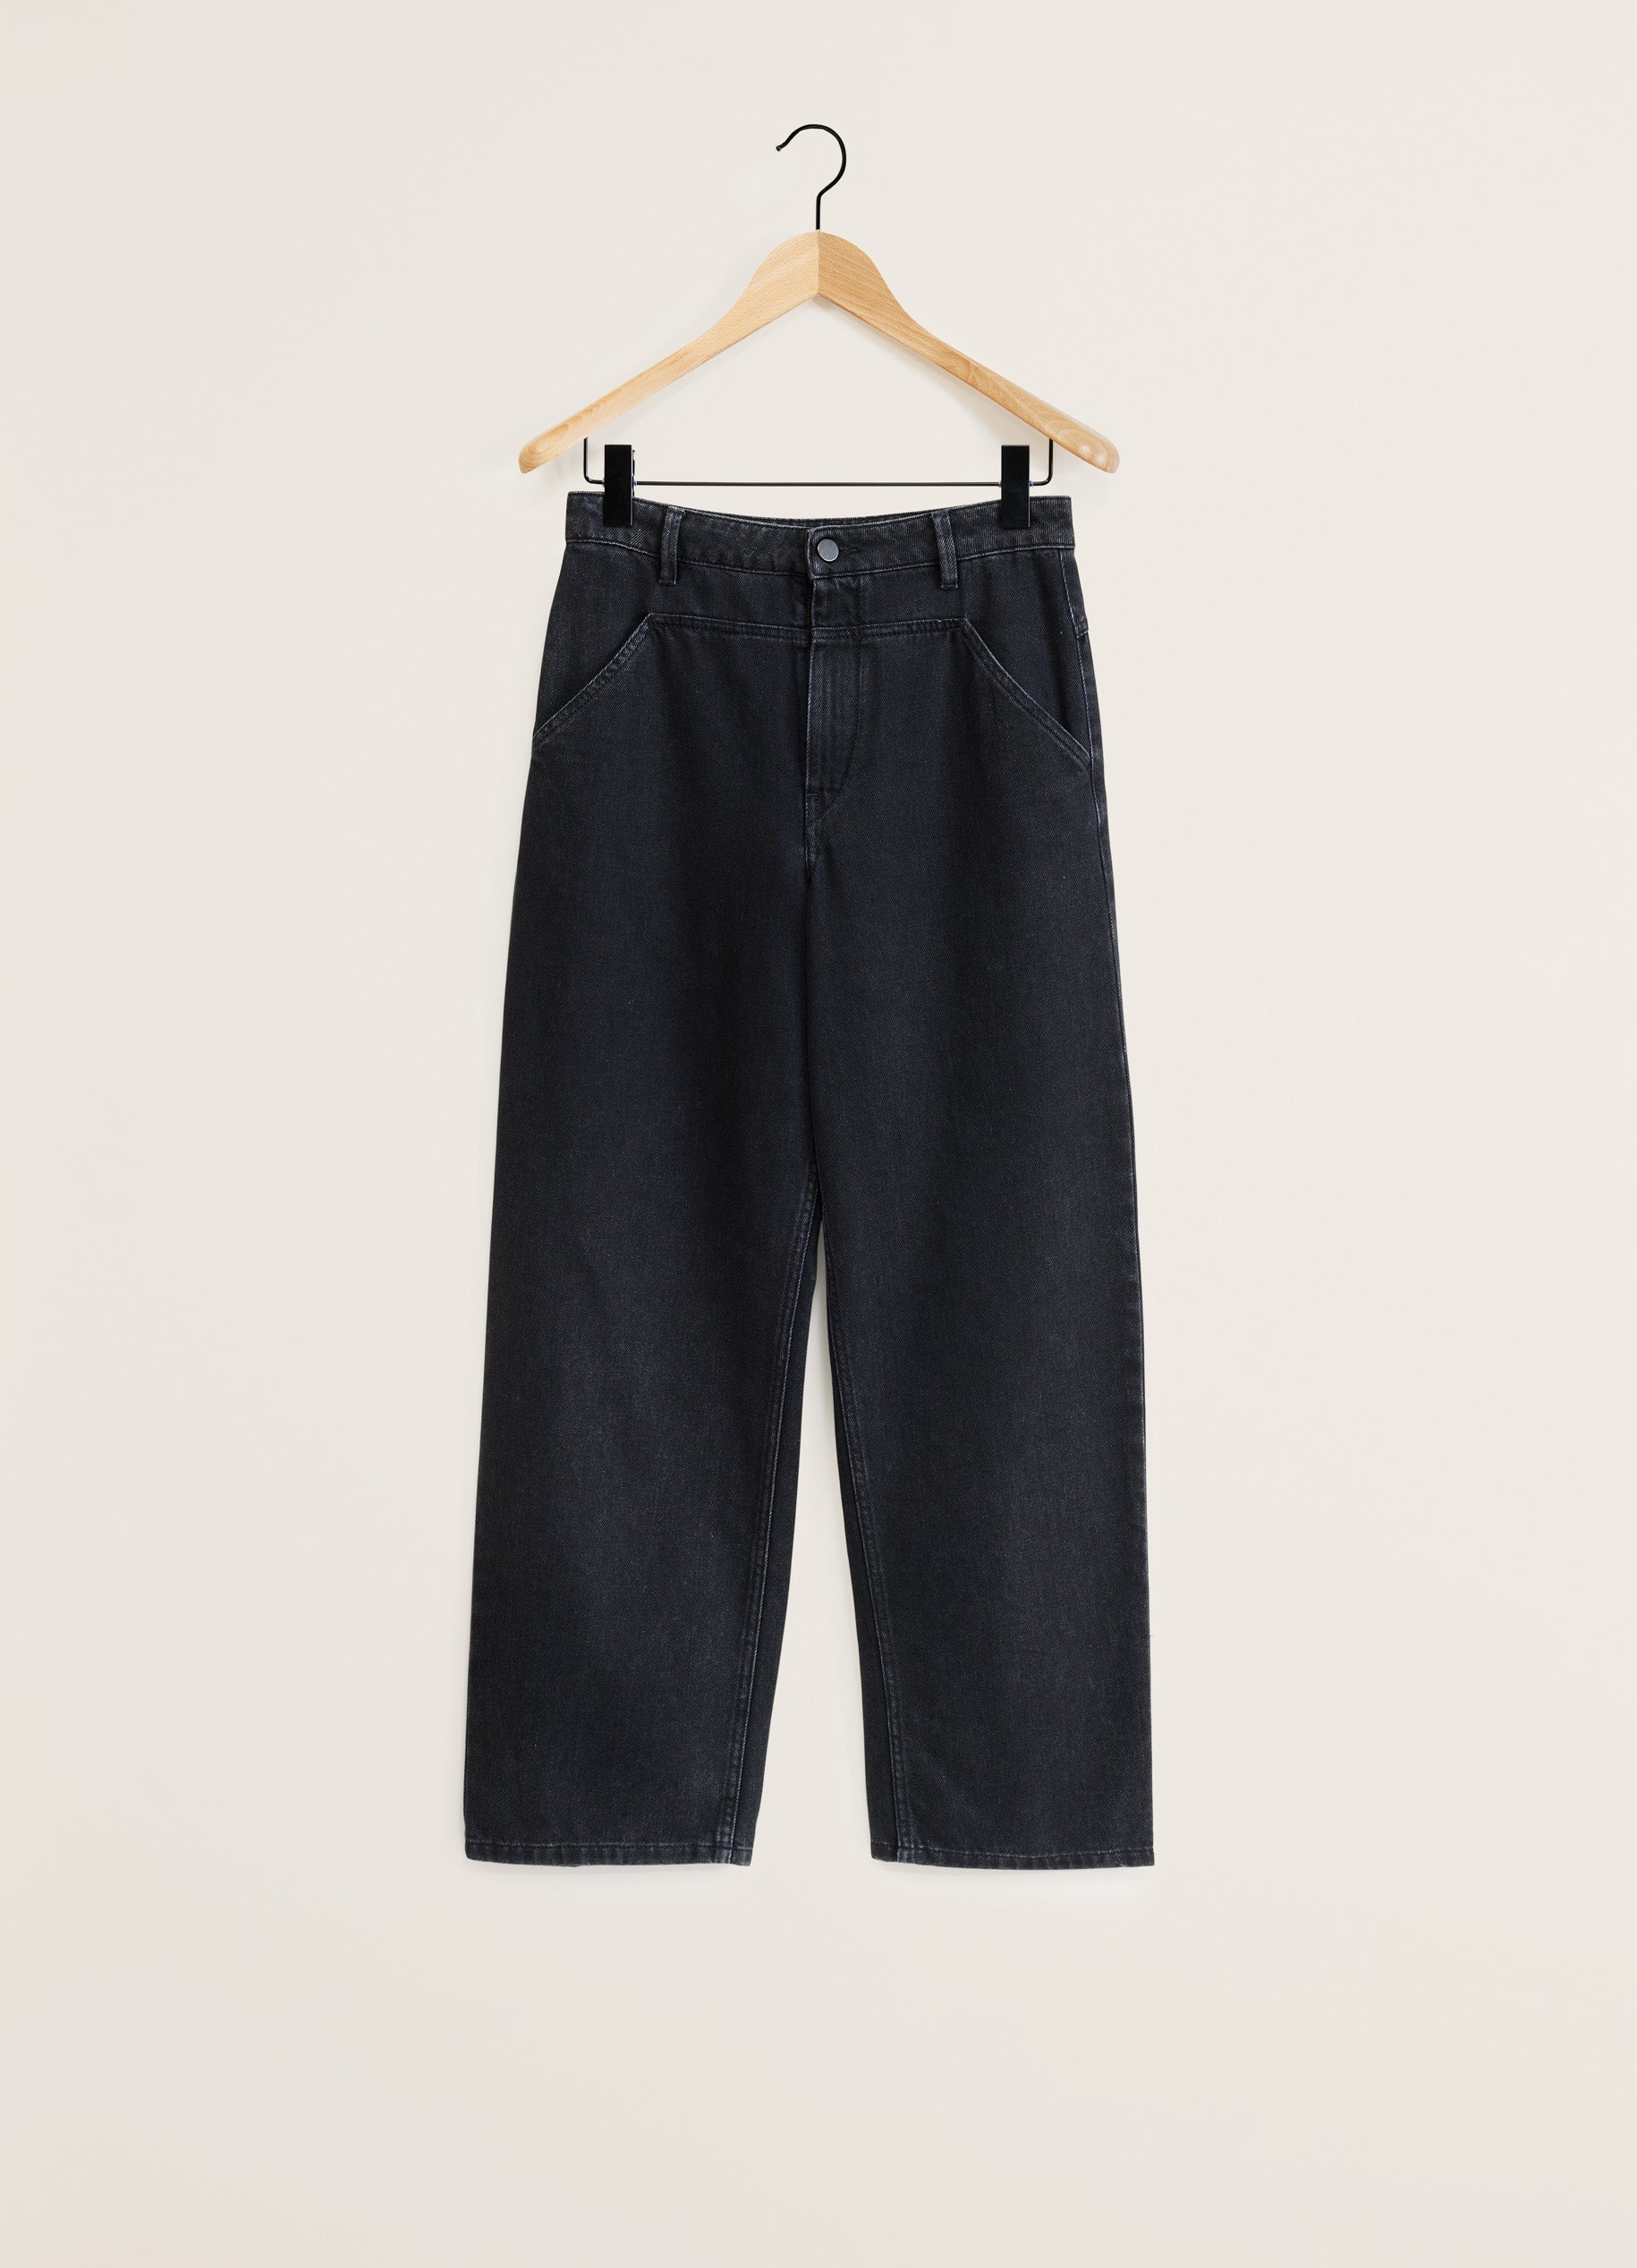 Indigo Blue High Waisted Curved Pants in Heavy Denim | LEMAIRE